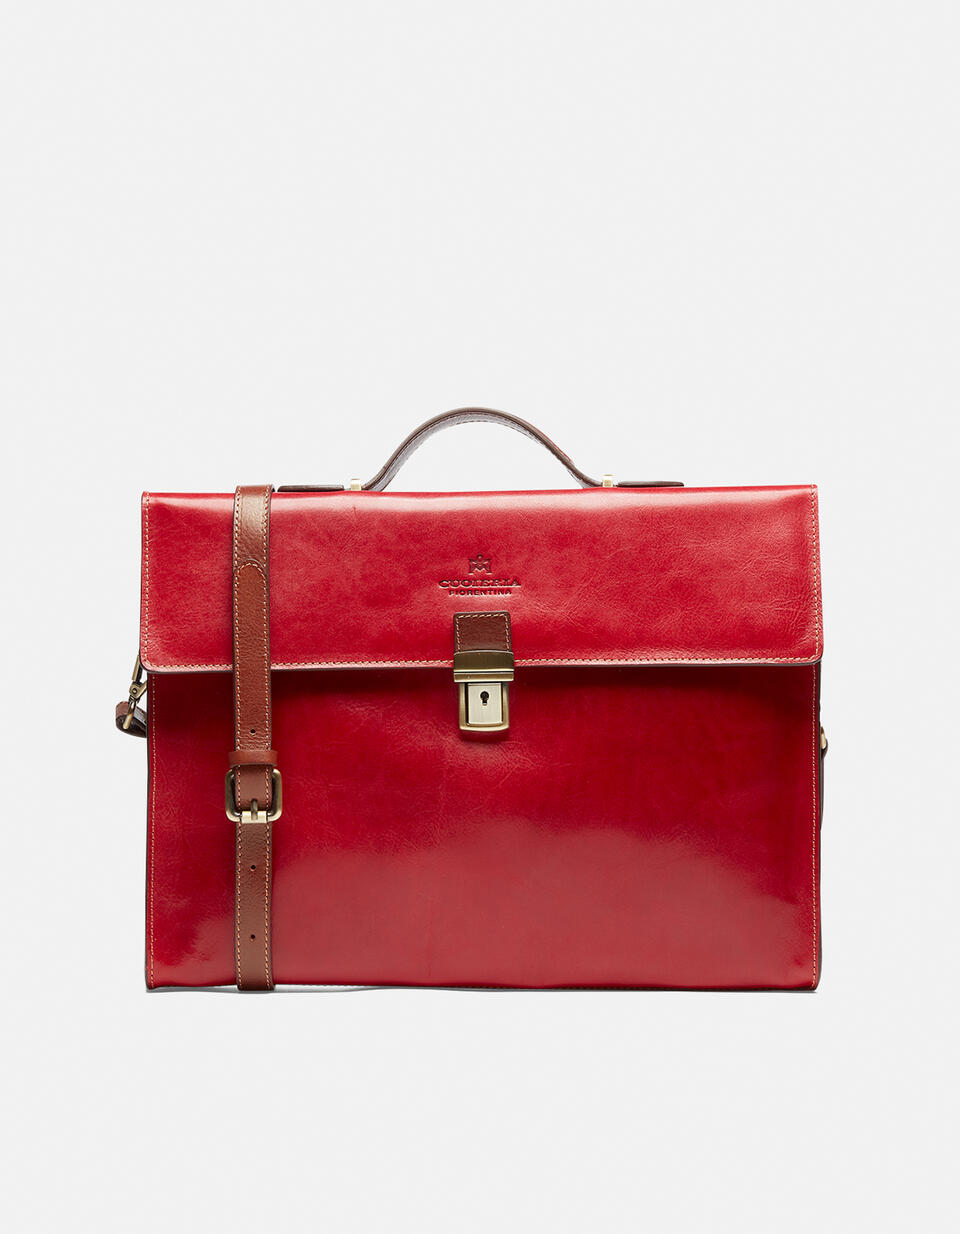 Warm and Colour leather briefcase with side zips - Briefcases and Laptop Bags | Briefcases ROSSOBICOLORE - Briefcases and Laptop Bags | BriefcasesCuoieria Fiorentina